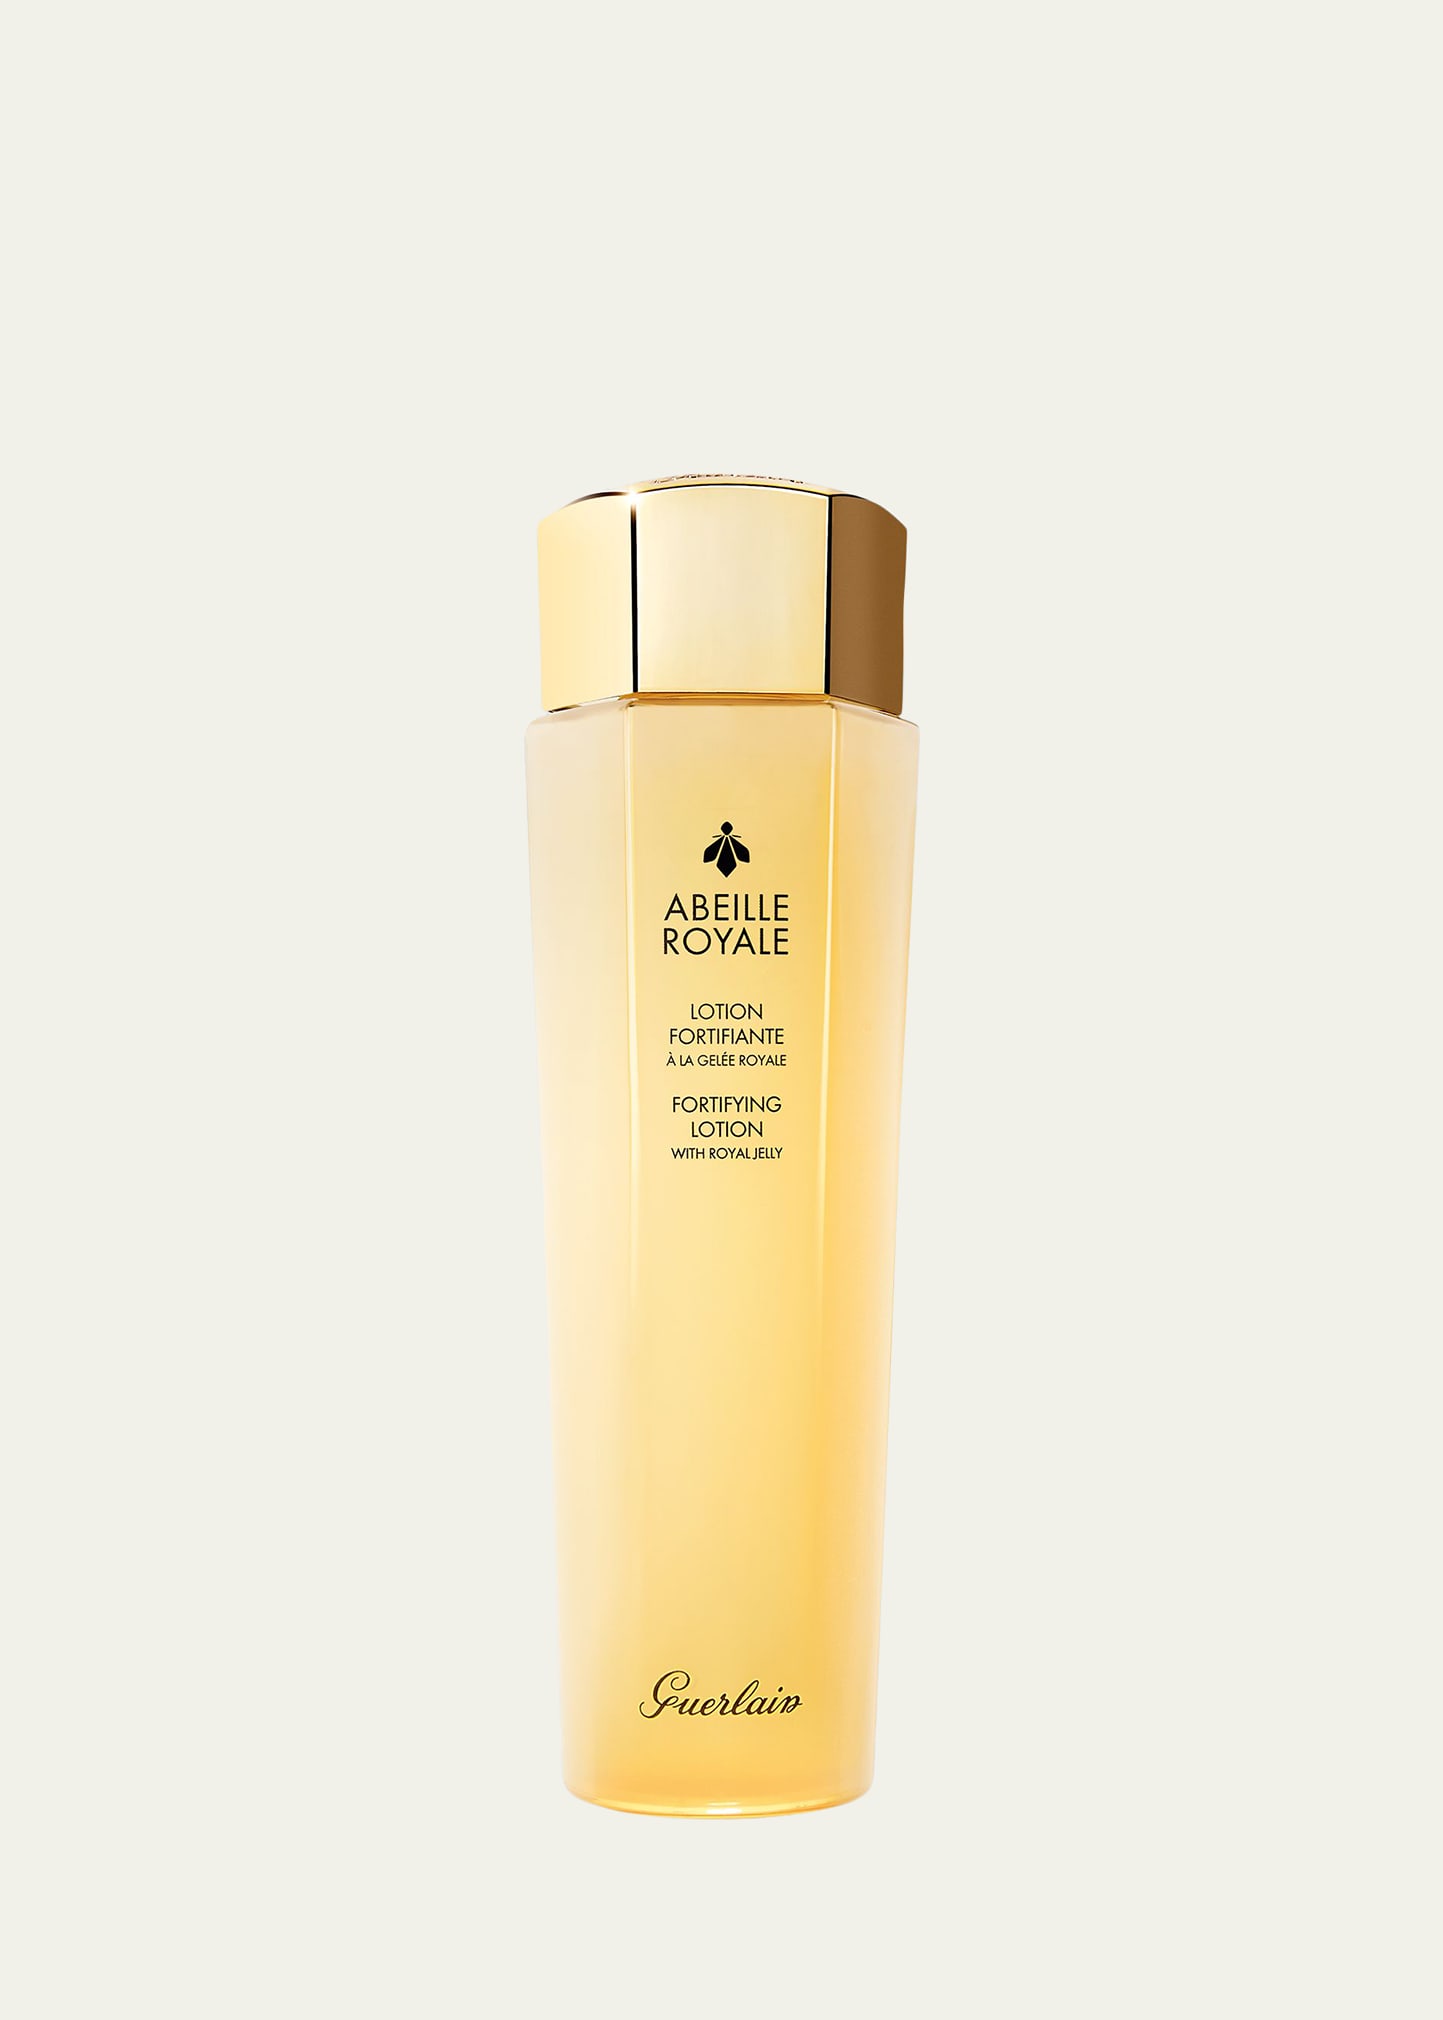 Abeille Royale Anti-Aging Fortifying Lotion with Royal Jelly, 5 oz.